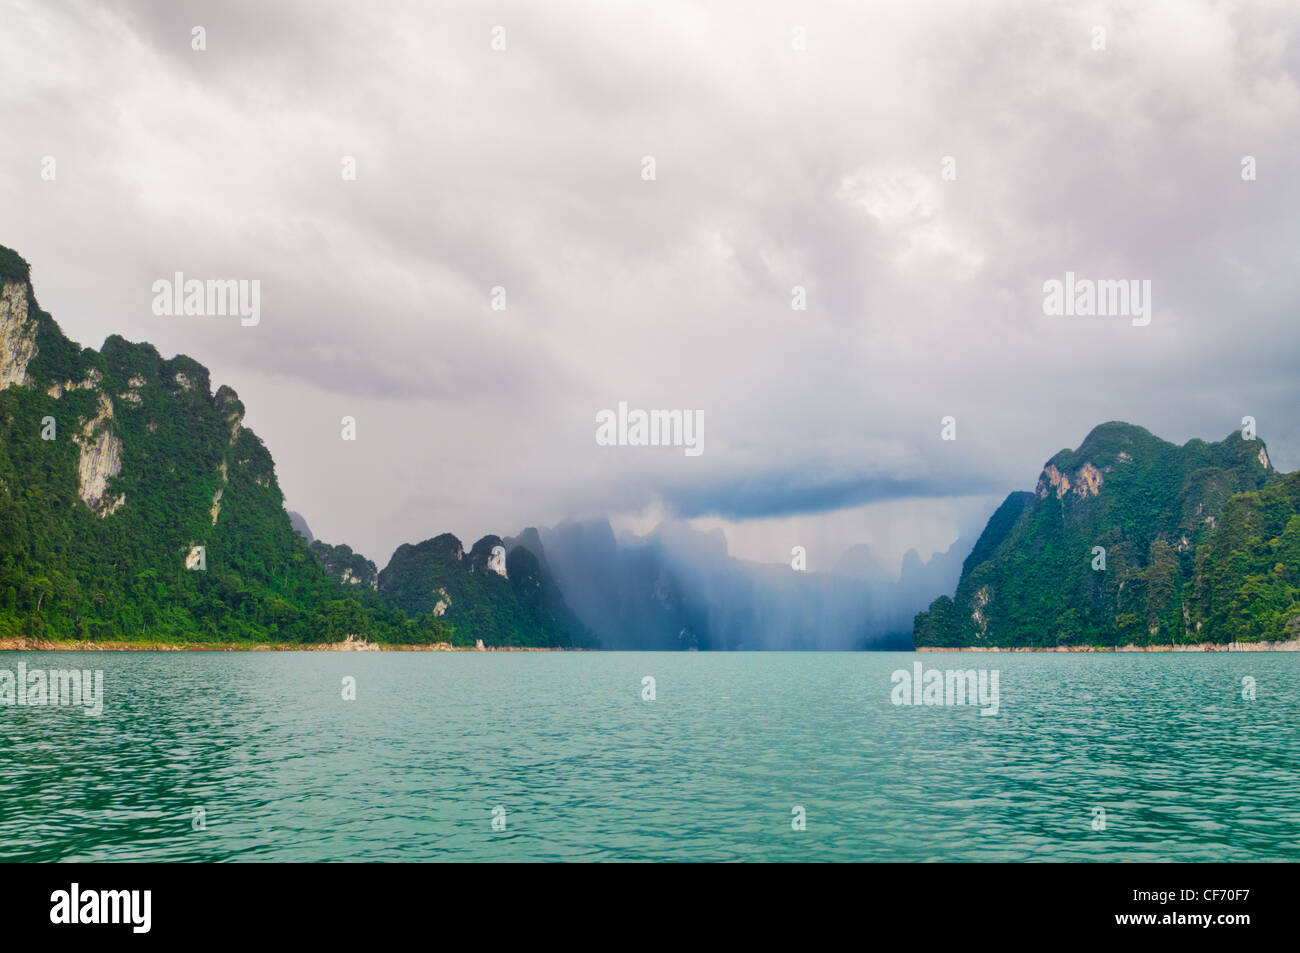 Inclement weather in Khao Sok National Park, Thailand. An approaching rainstorm is clearly visible in the distance. Stock Photo